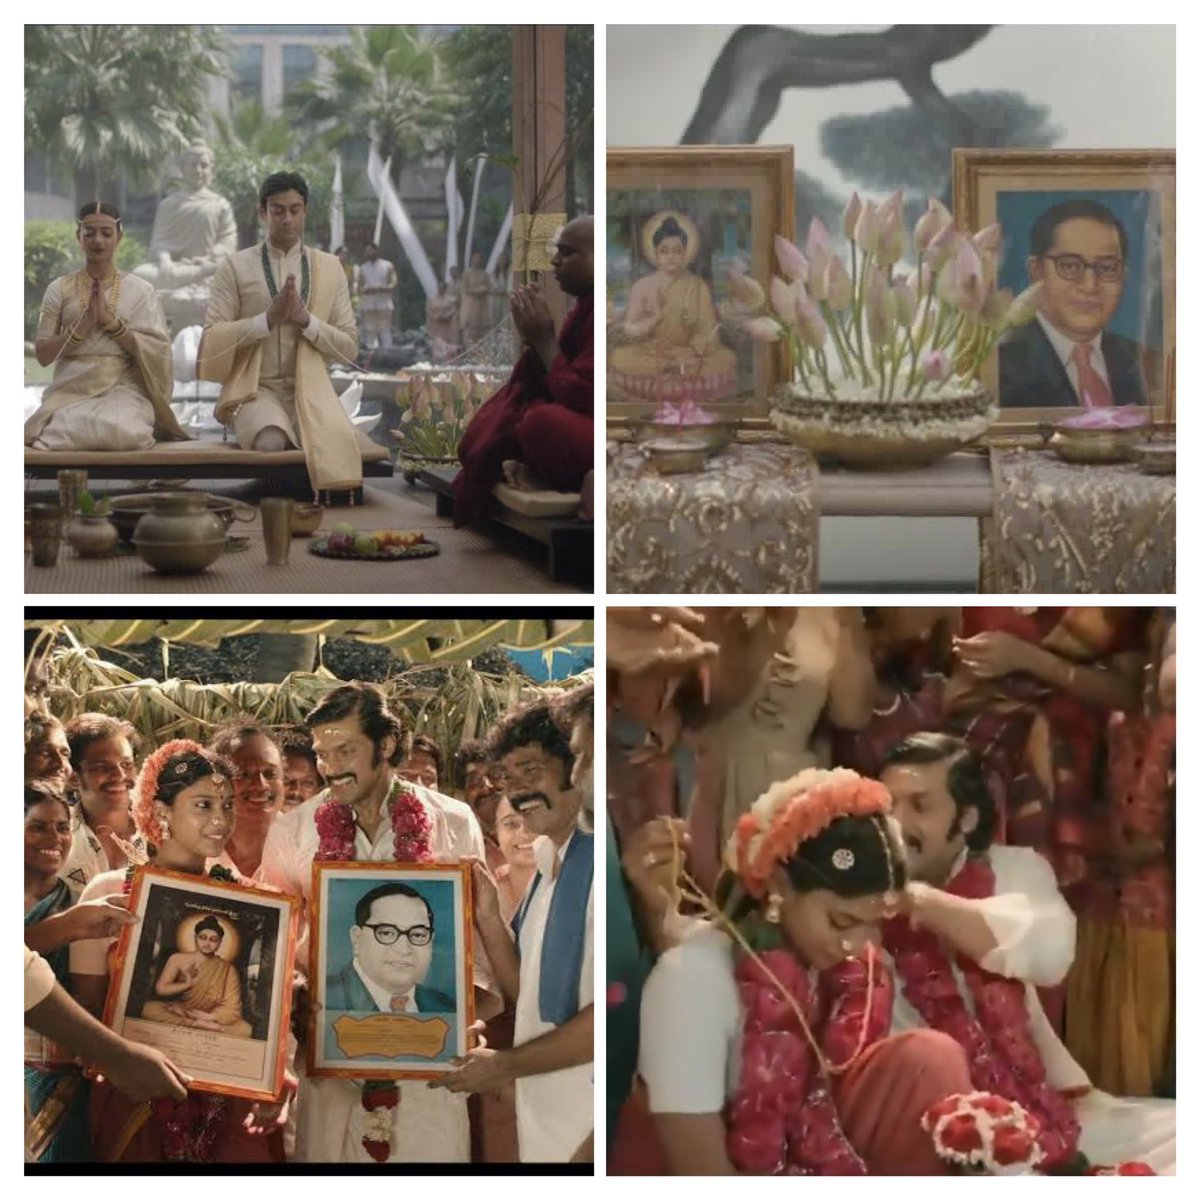 Weddings in 'Made in Heaven' S2 E5 and weddings in 'Sarpatta Parambarai.' Buddhist weddings are finding a place in mainstream cinema and OTT platforms. A welcome change. Personally, I enjoyed the Tamil Buddhist marriage more because of the lively dancing and good food, while…